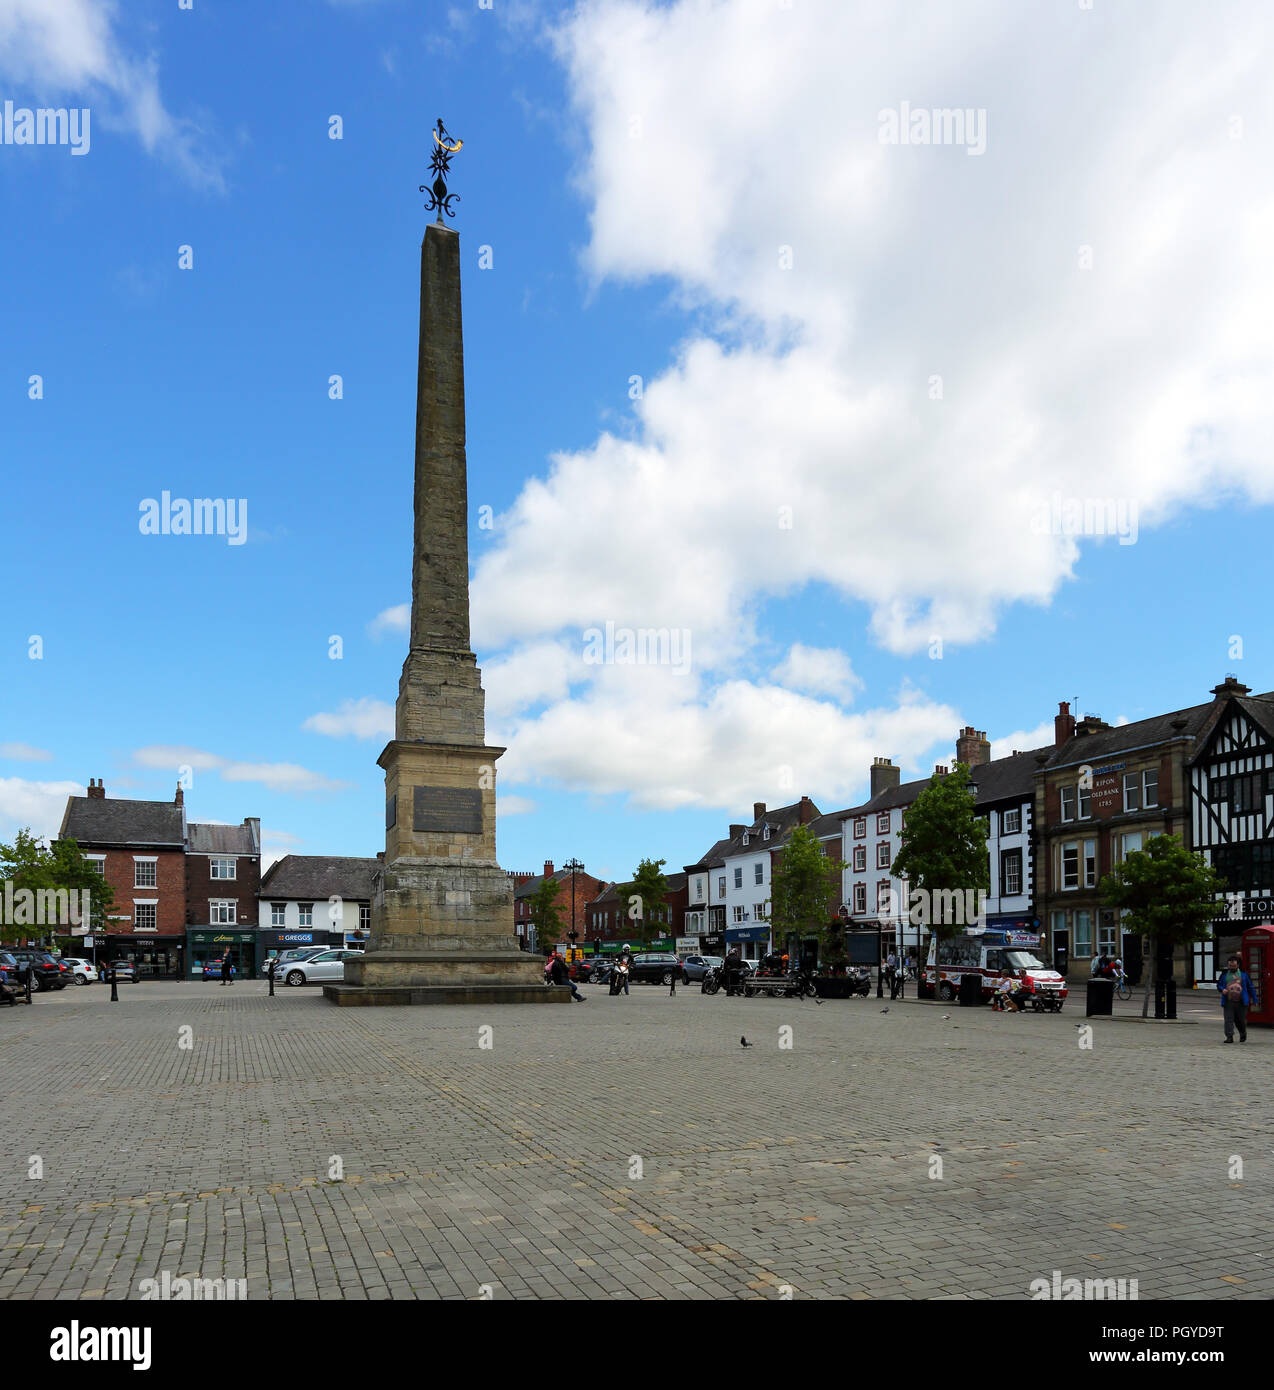 The main square in Ripon, North Yorkshire, England, showing the tall memorial monument. Stock Photo